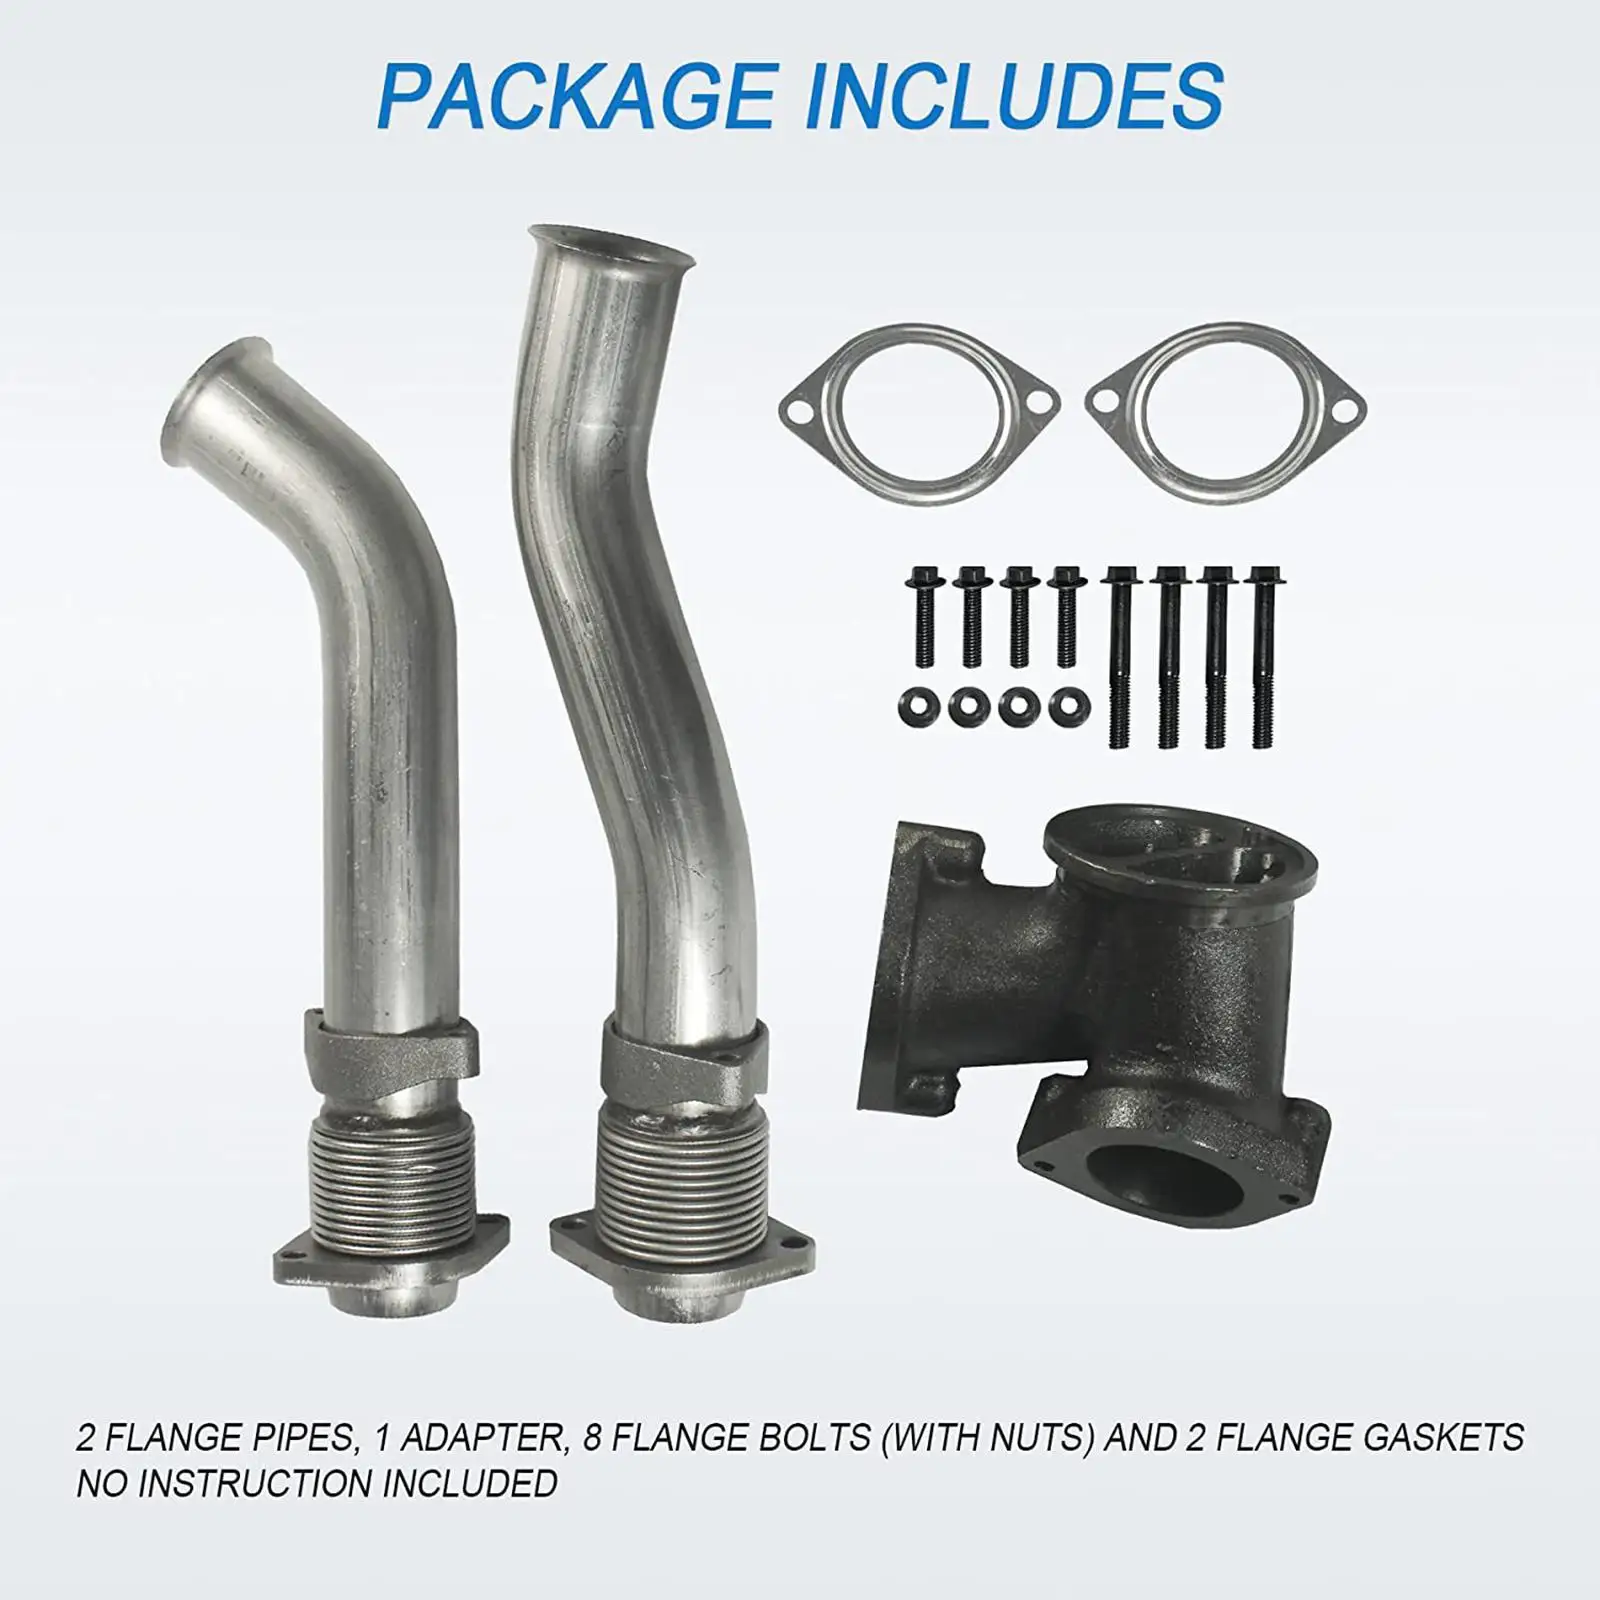 Turbocharger up Pipe Kit 679-005 Repair Parts Diesel Turbine Pipe Kit for Ford F-450 F-550 Super Durability Easy to Install